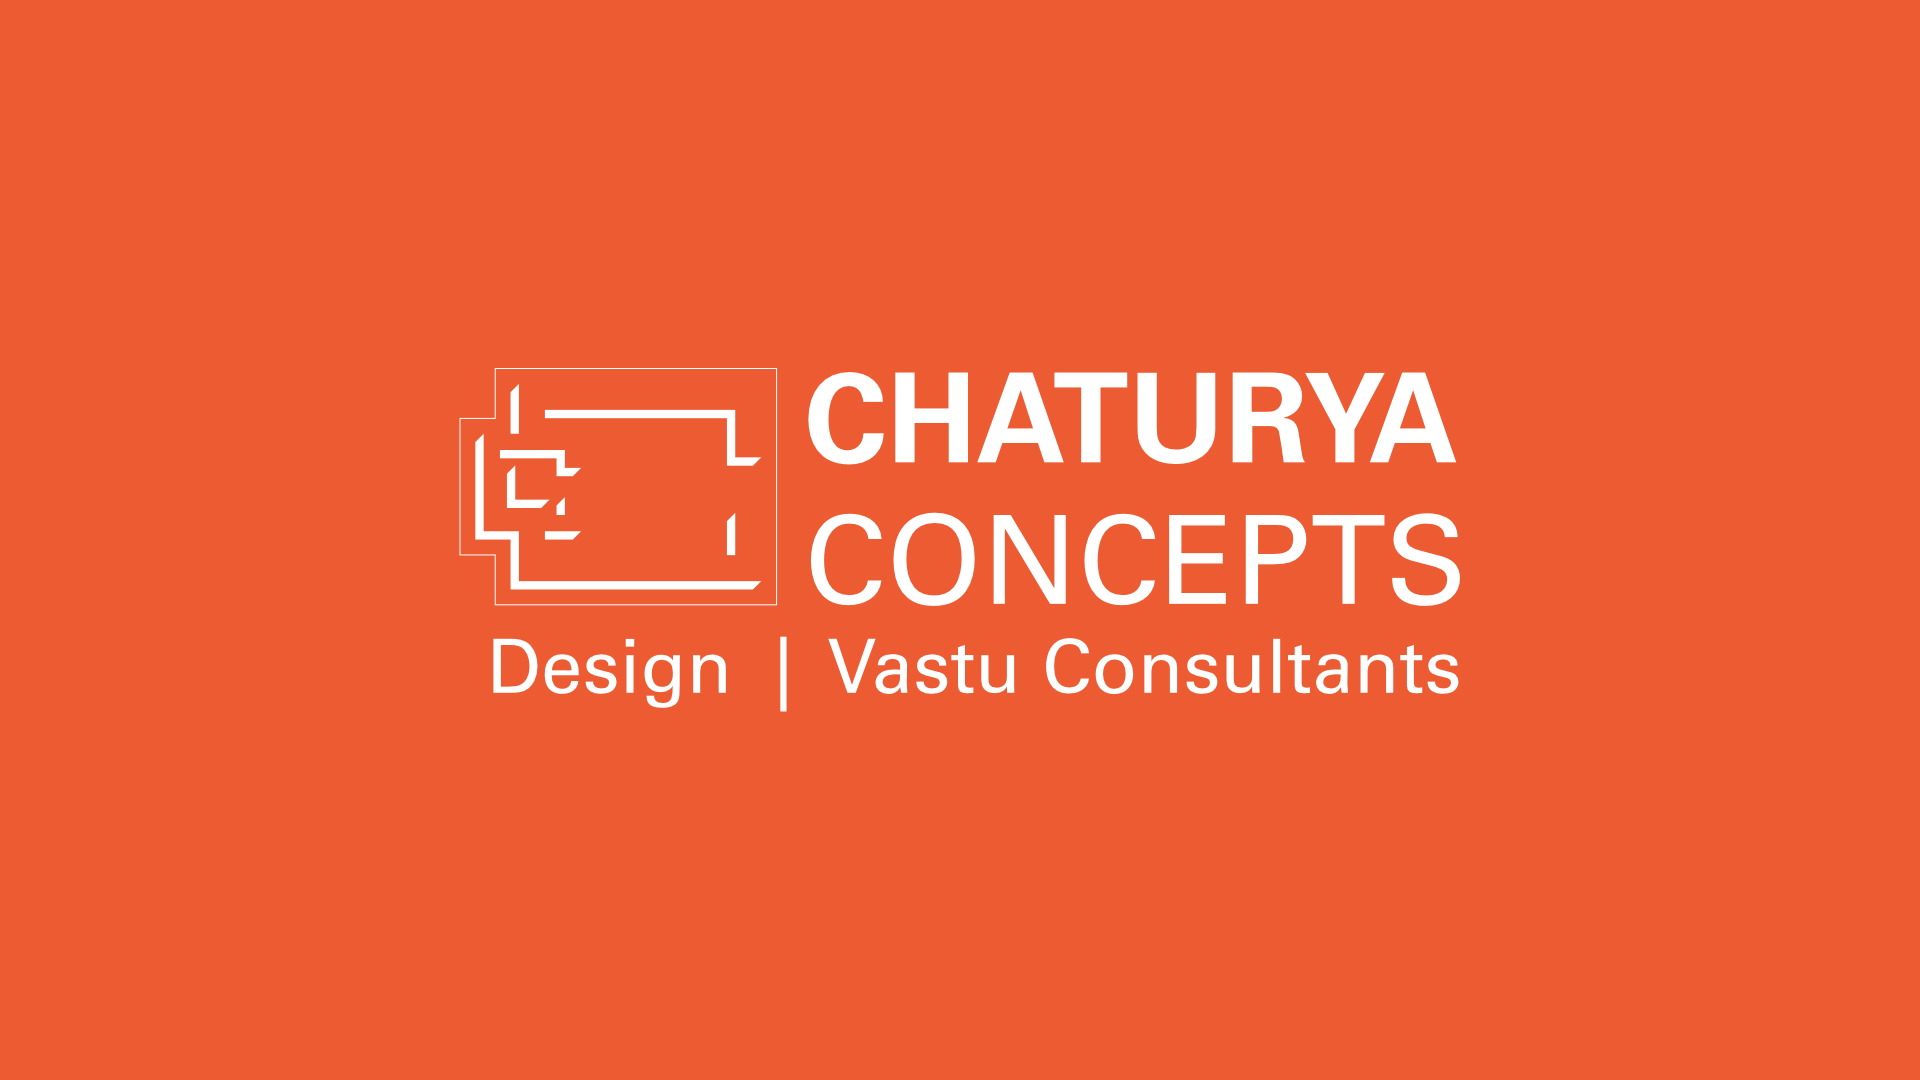 The identity is evolved from the classic temple plan. It has the character C, repeated twice indicating the first letters of â€˜Chaturya Conceptsâ€™